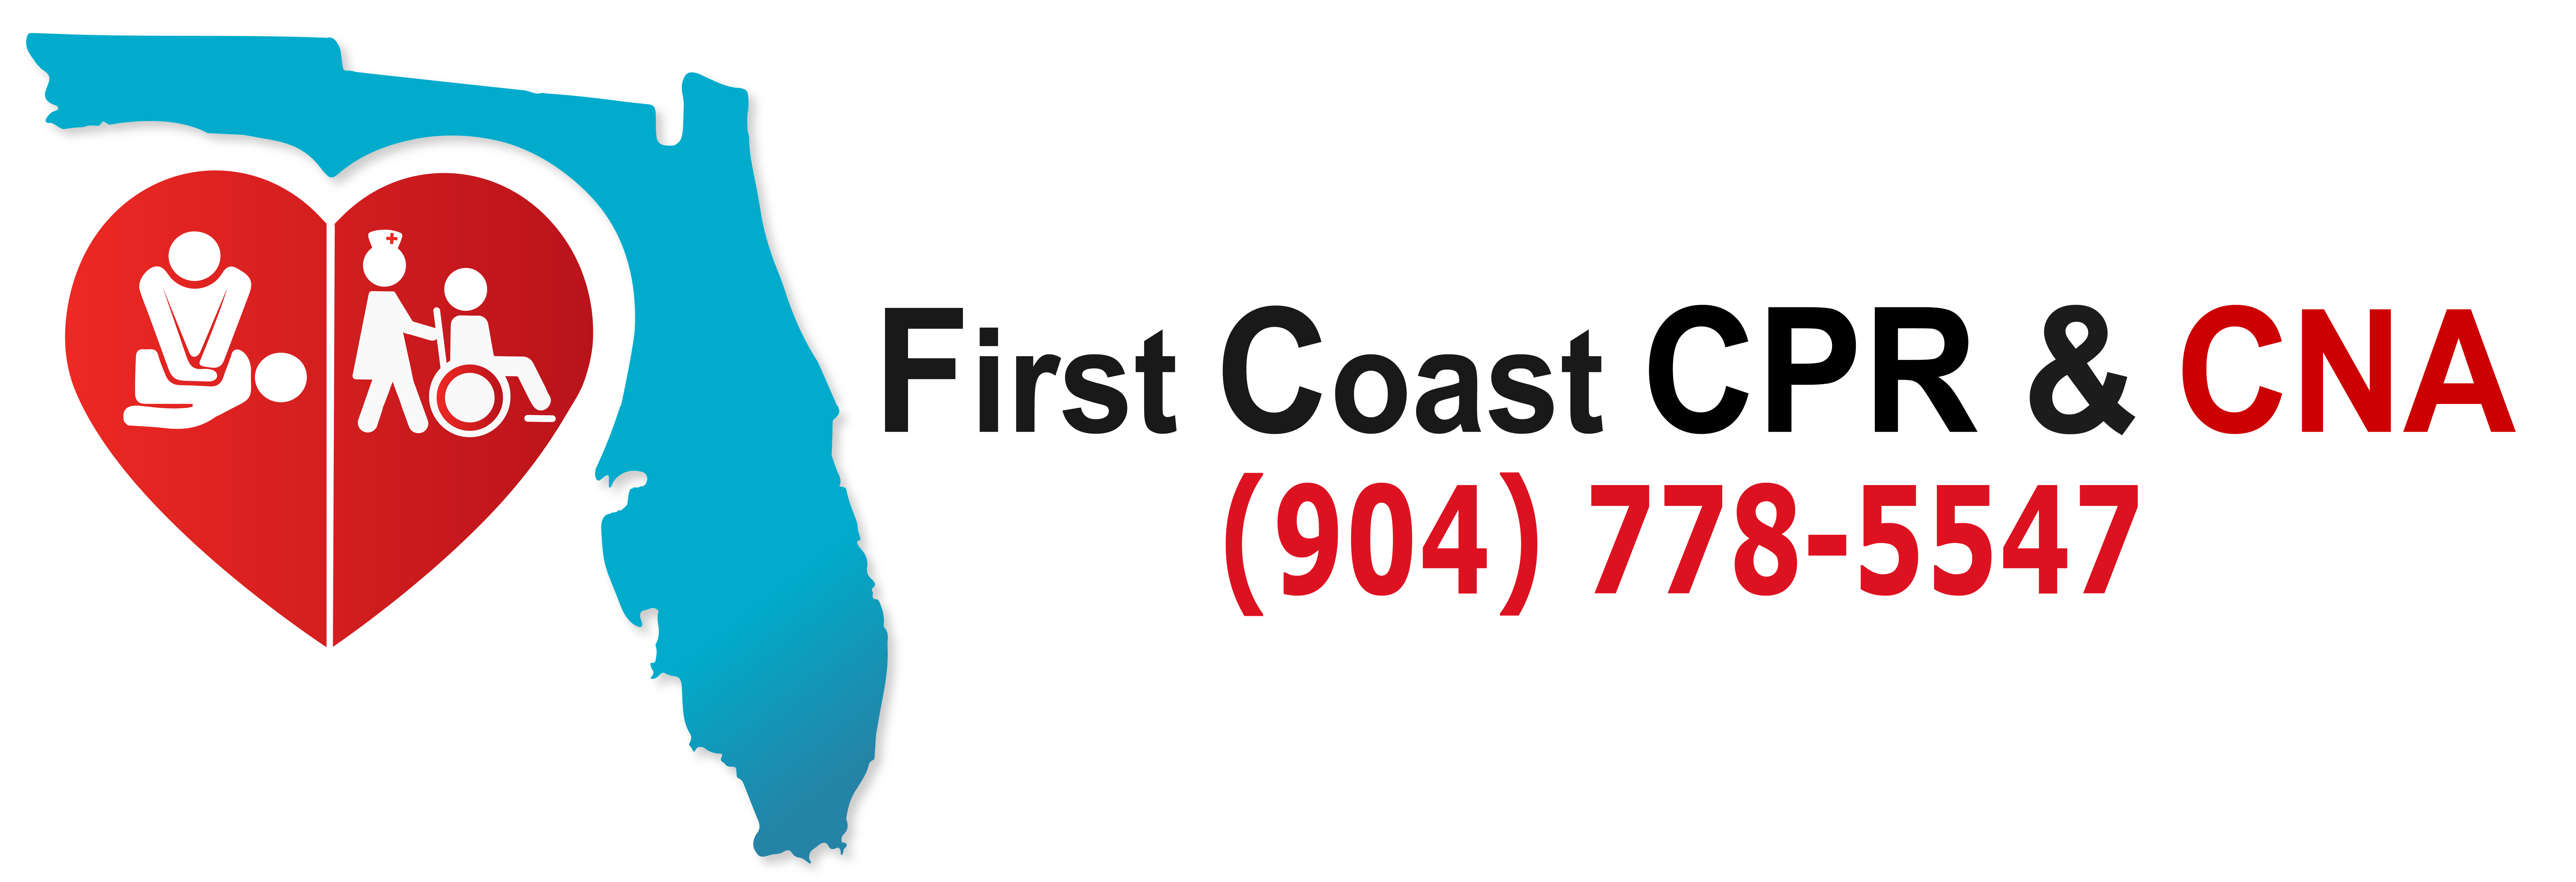 CPR Classes in Jacksonville FL BLS First Aid and ACLS Classes First